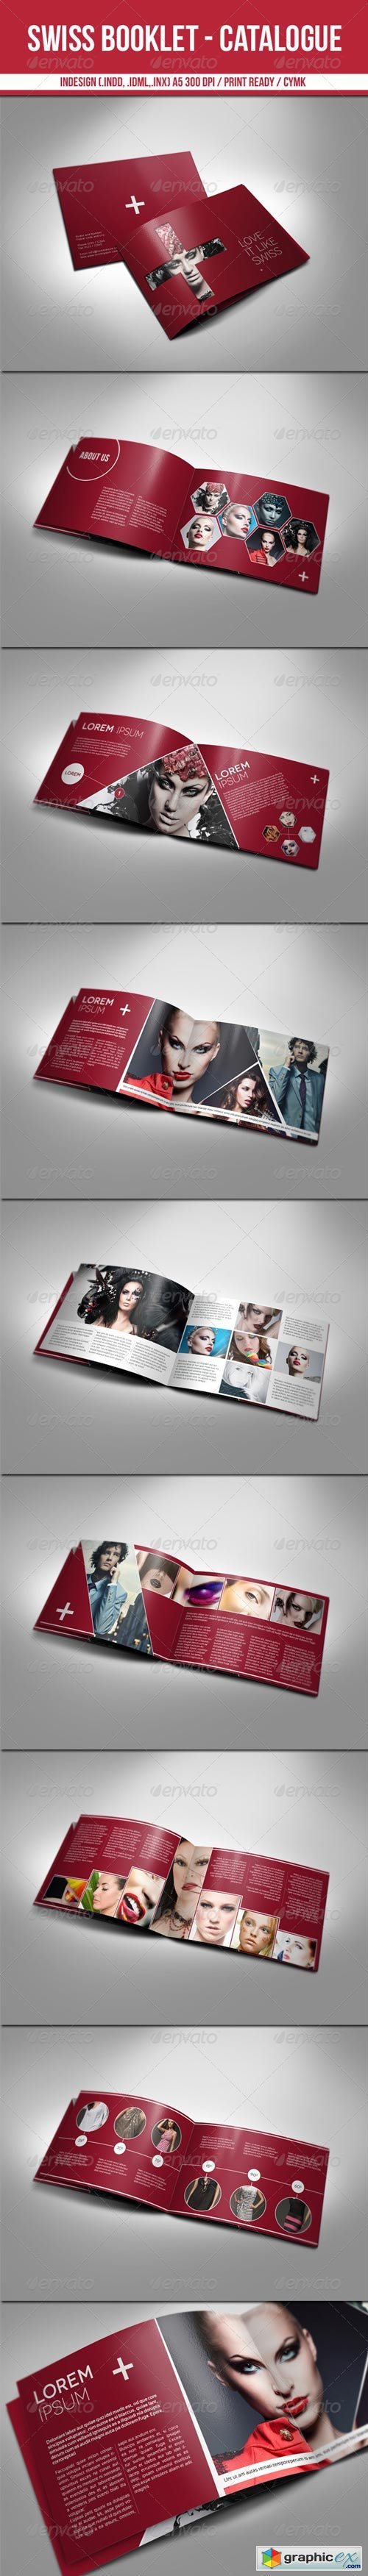 Swiss Booklet - Catalogue